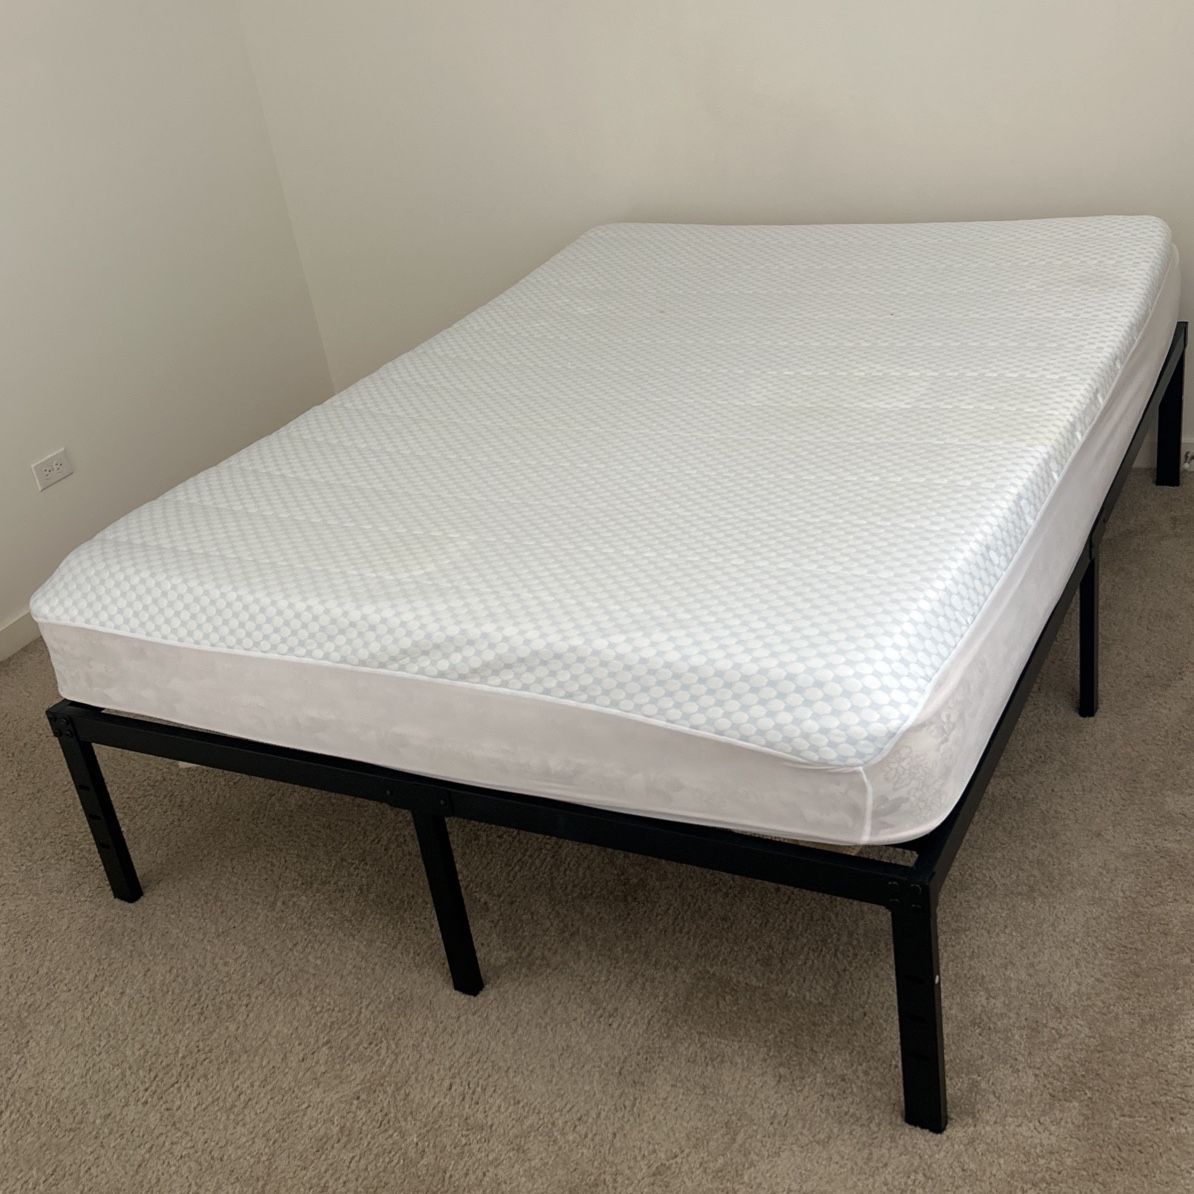 FREE Queen Size Bed Frame And Accessories 